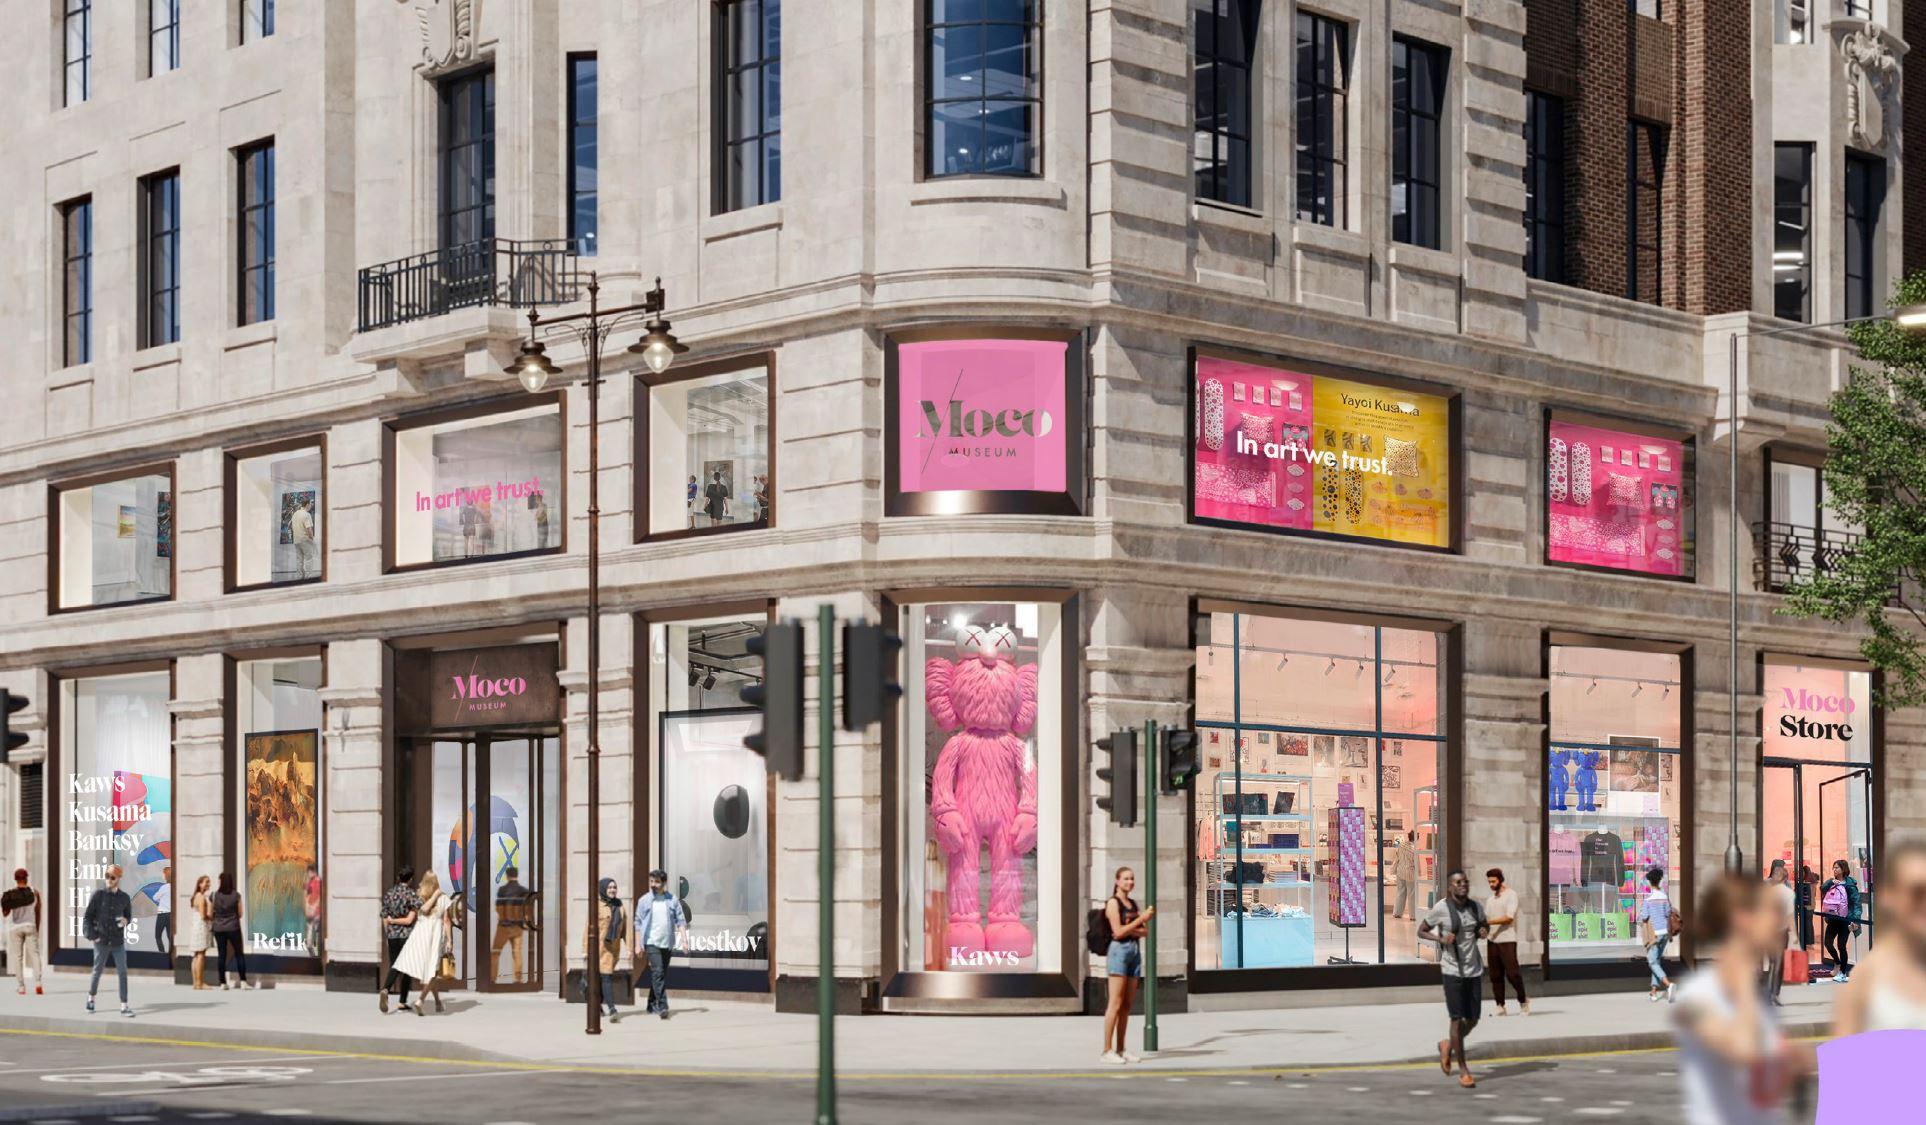 Moco Museum London will open in Marble Arch this summer